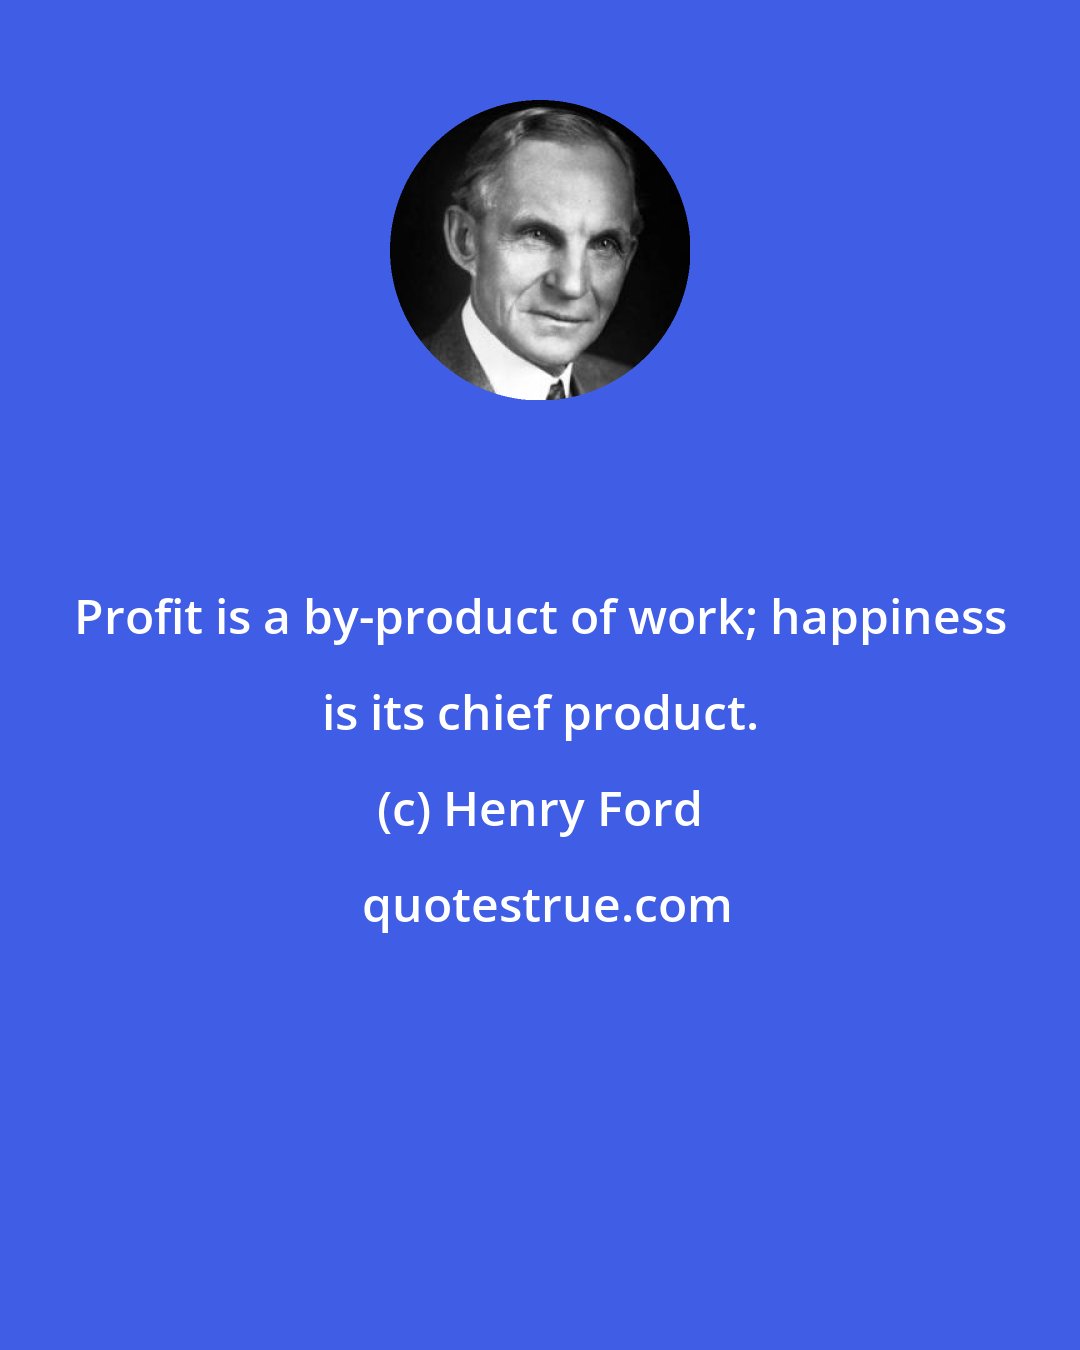 Henry Ford: Profit is a by-product of work; happiness is its chief product.